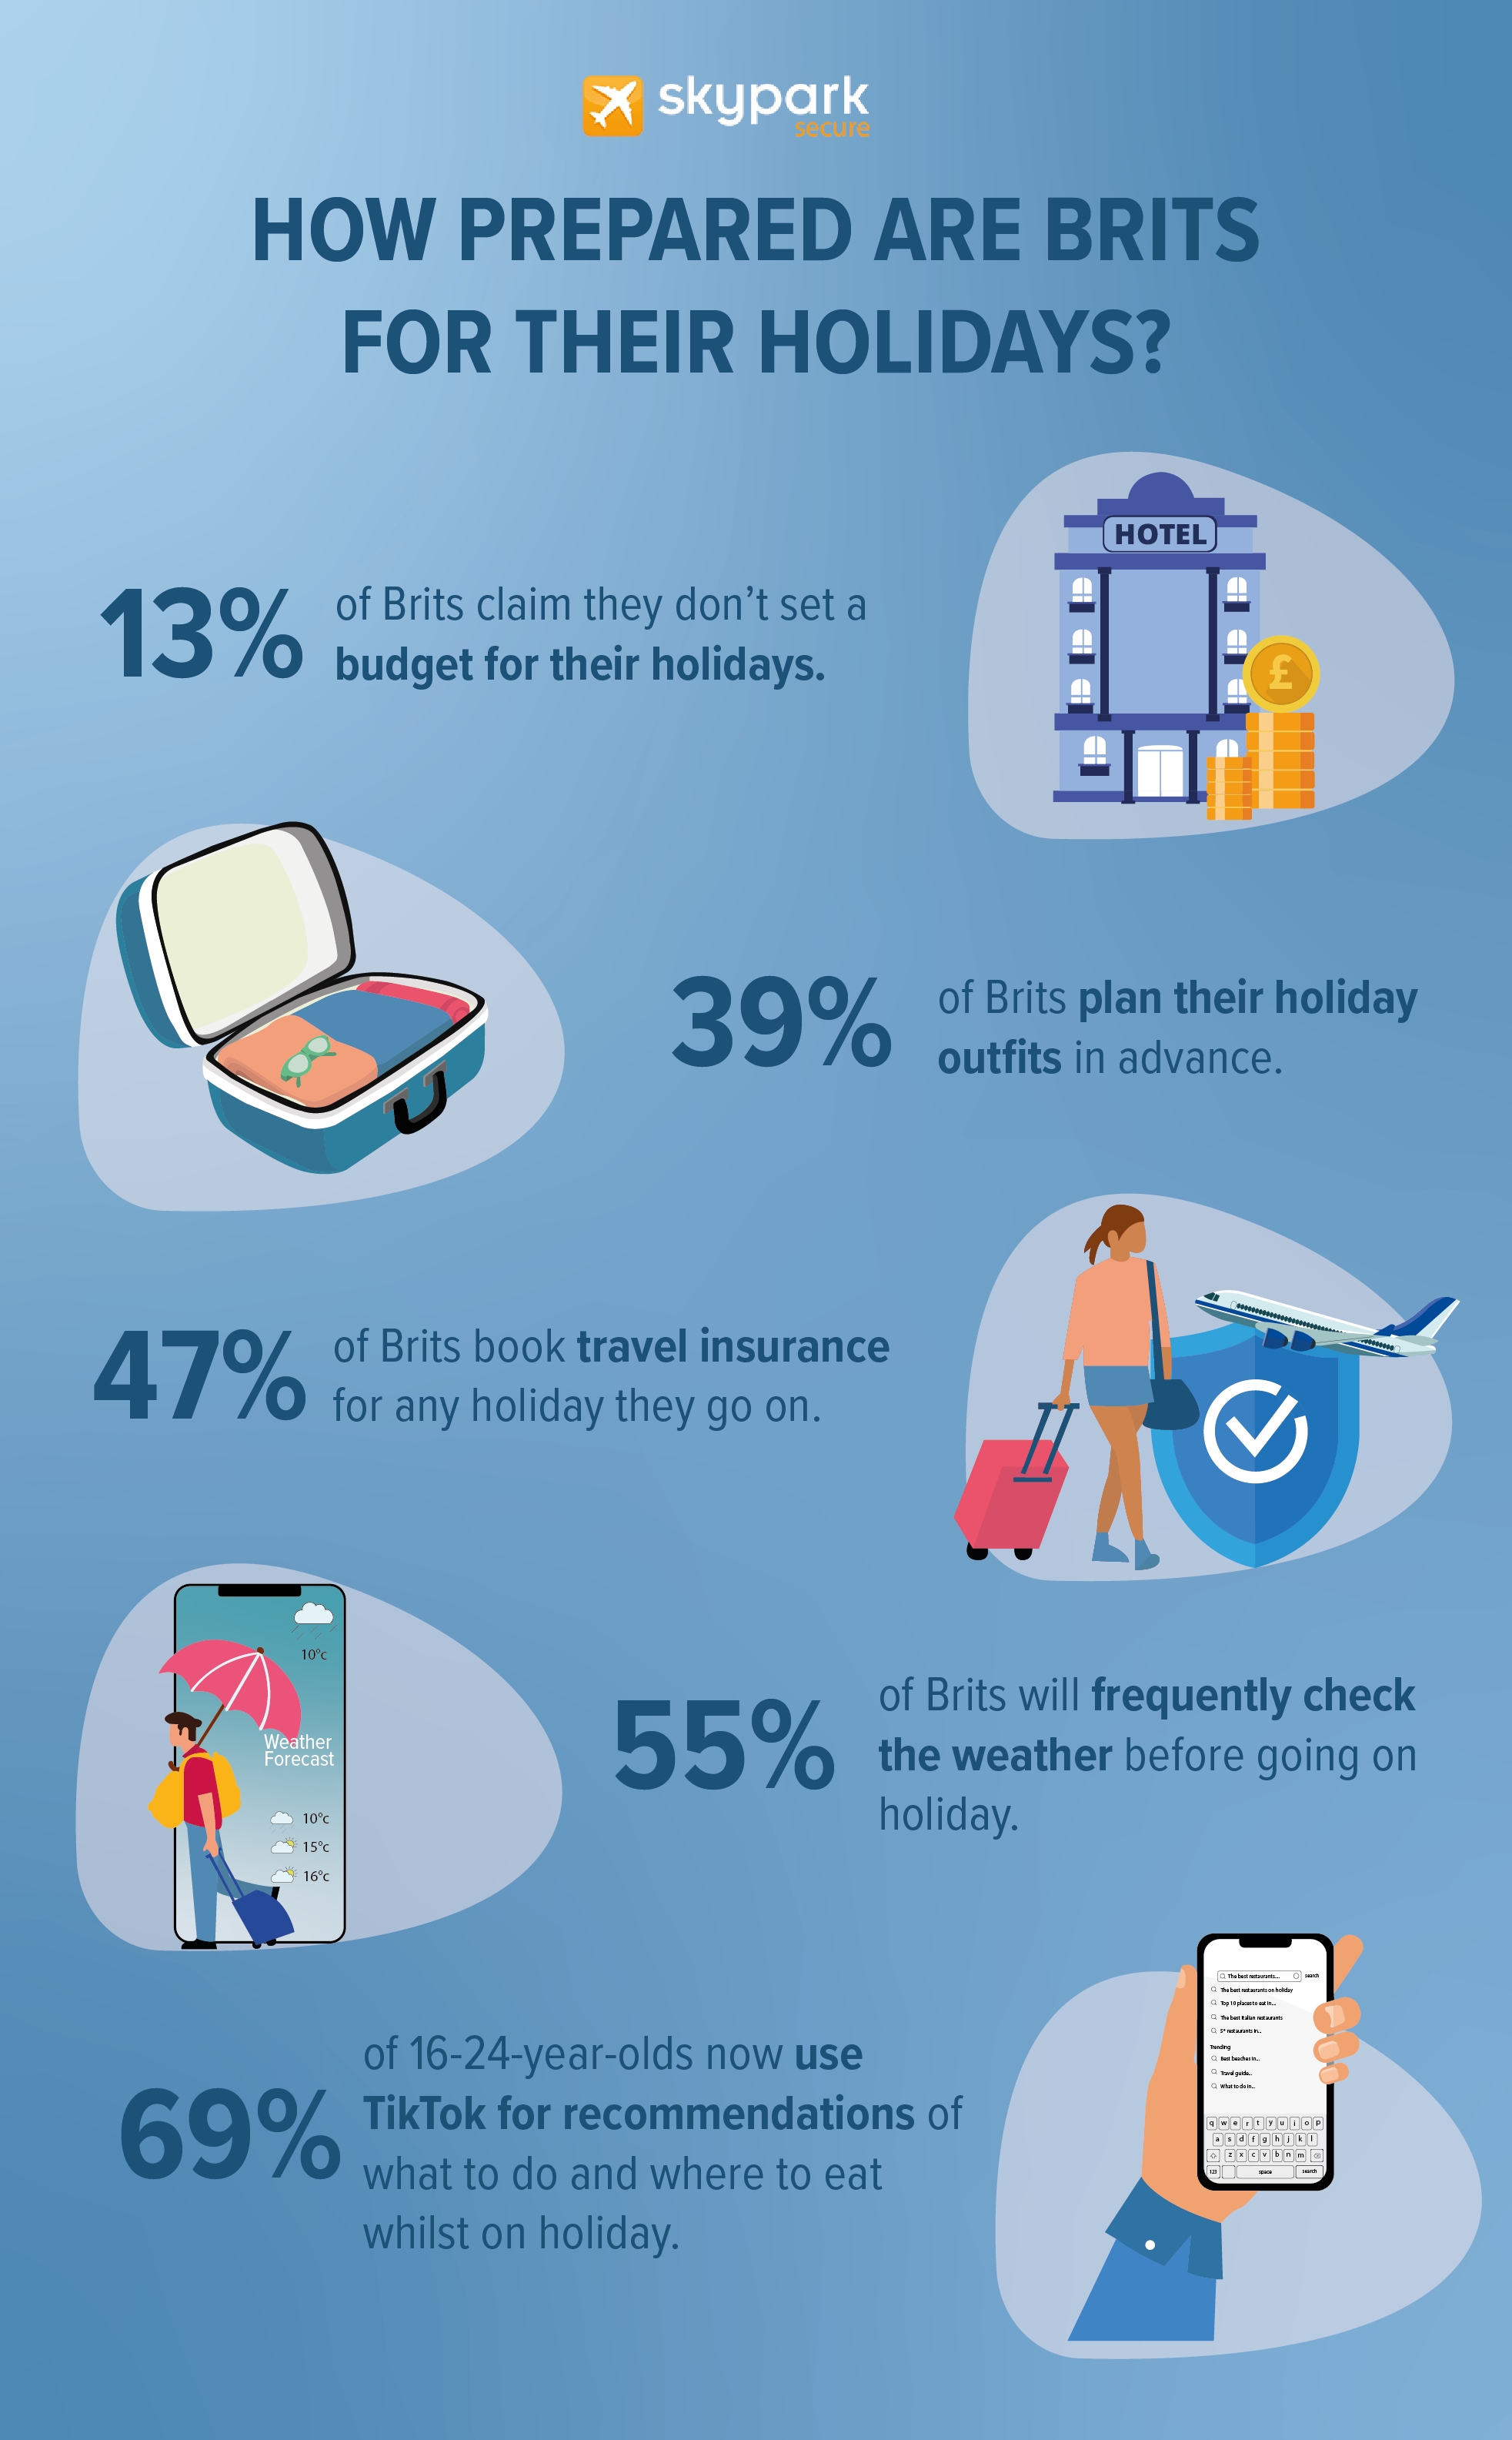 How Prepared are Brits for Holidays - Survey Results